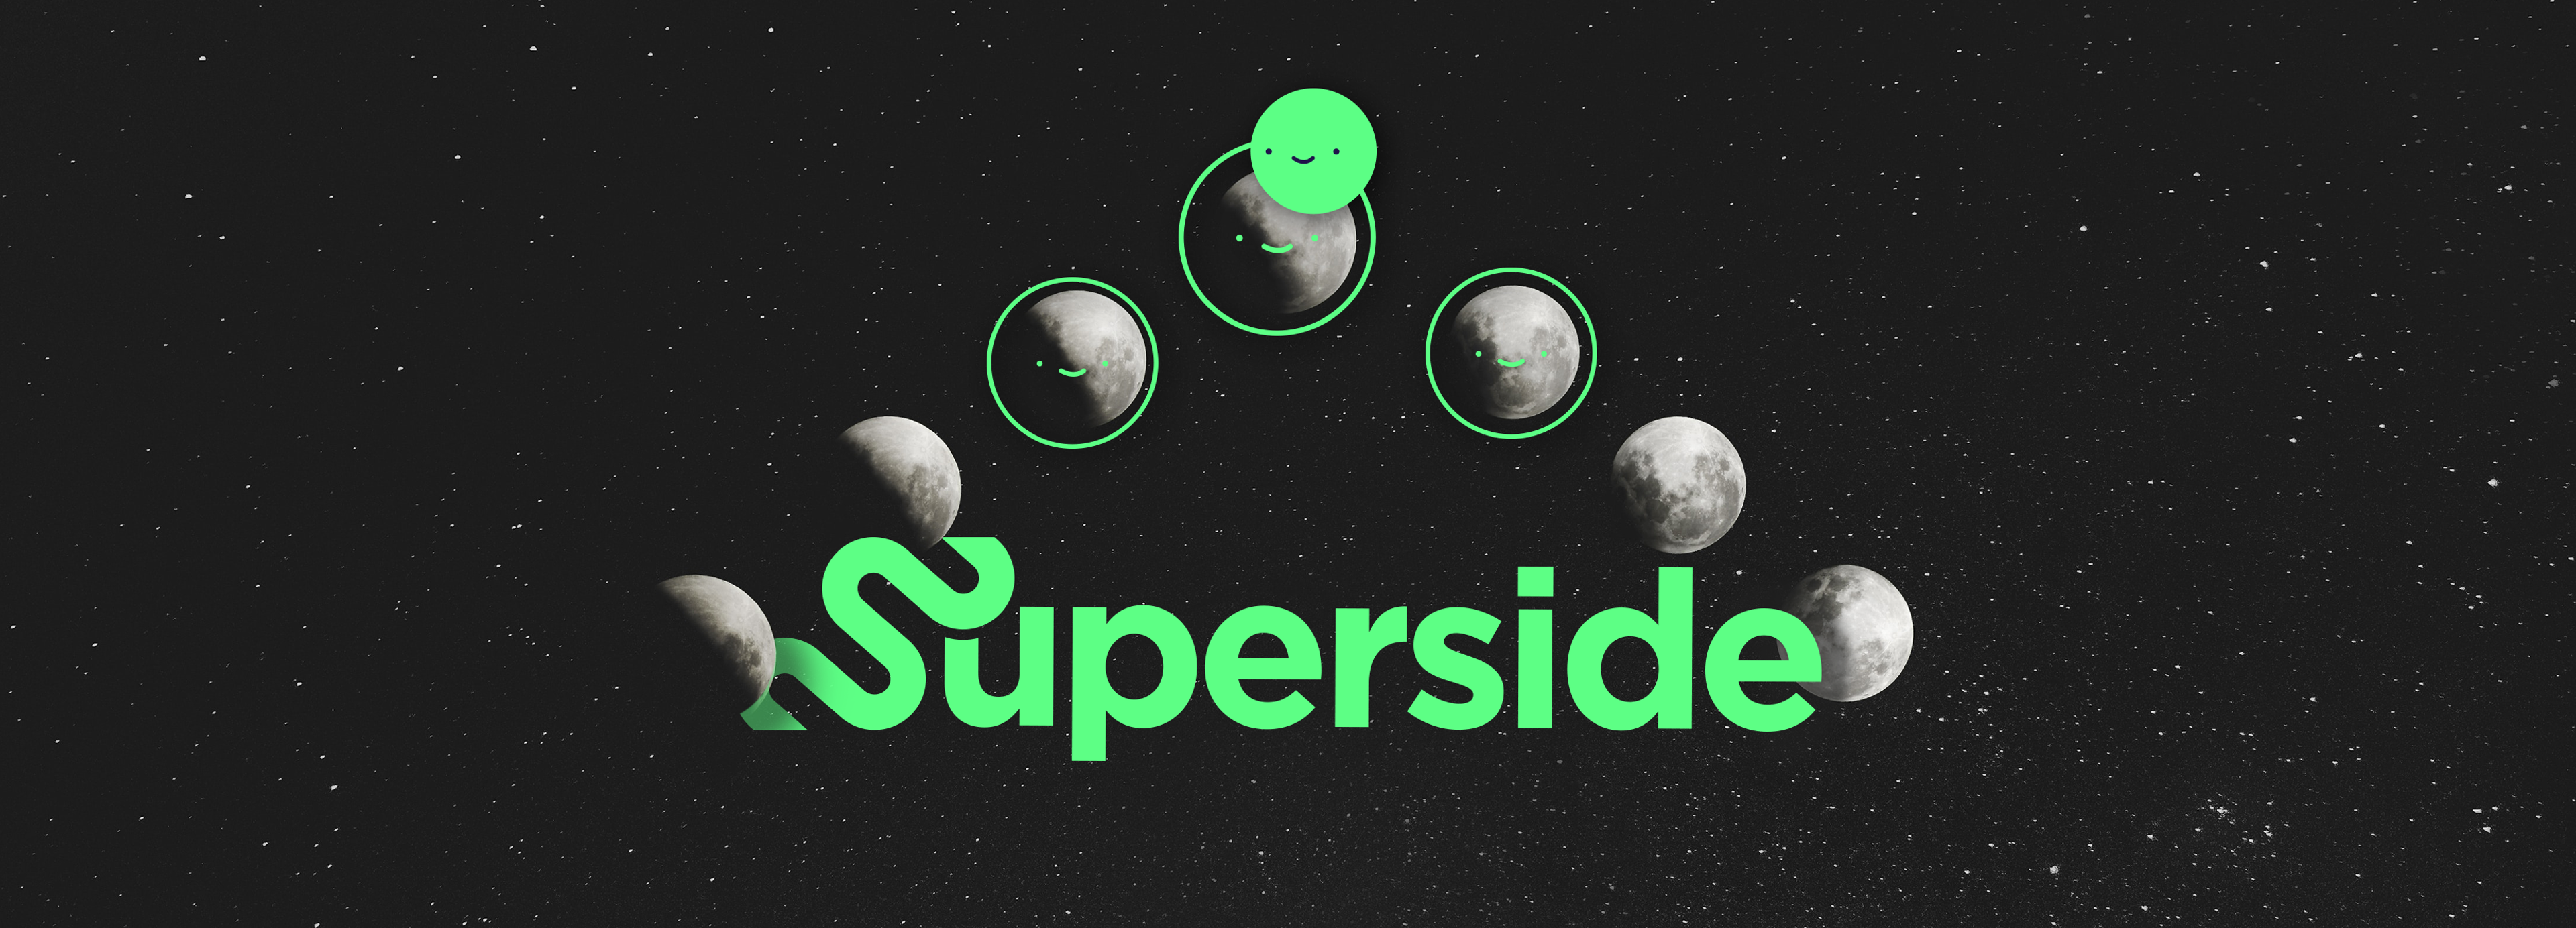 Konsus is Now Superside. Here’s Why. - Superside